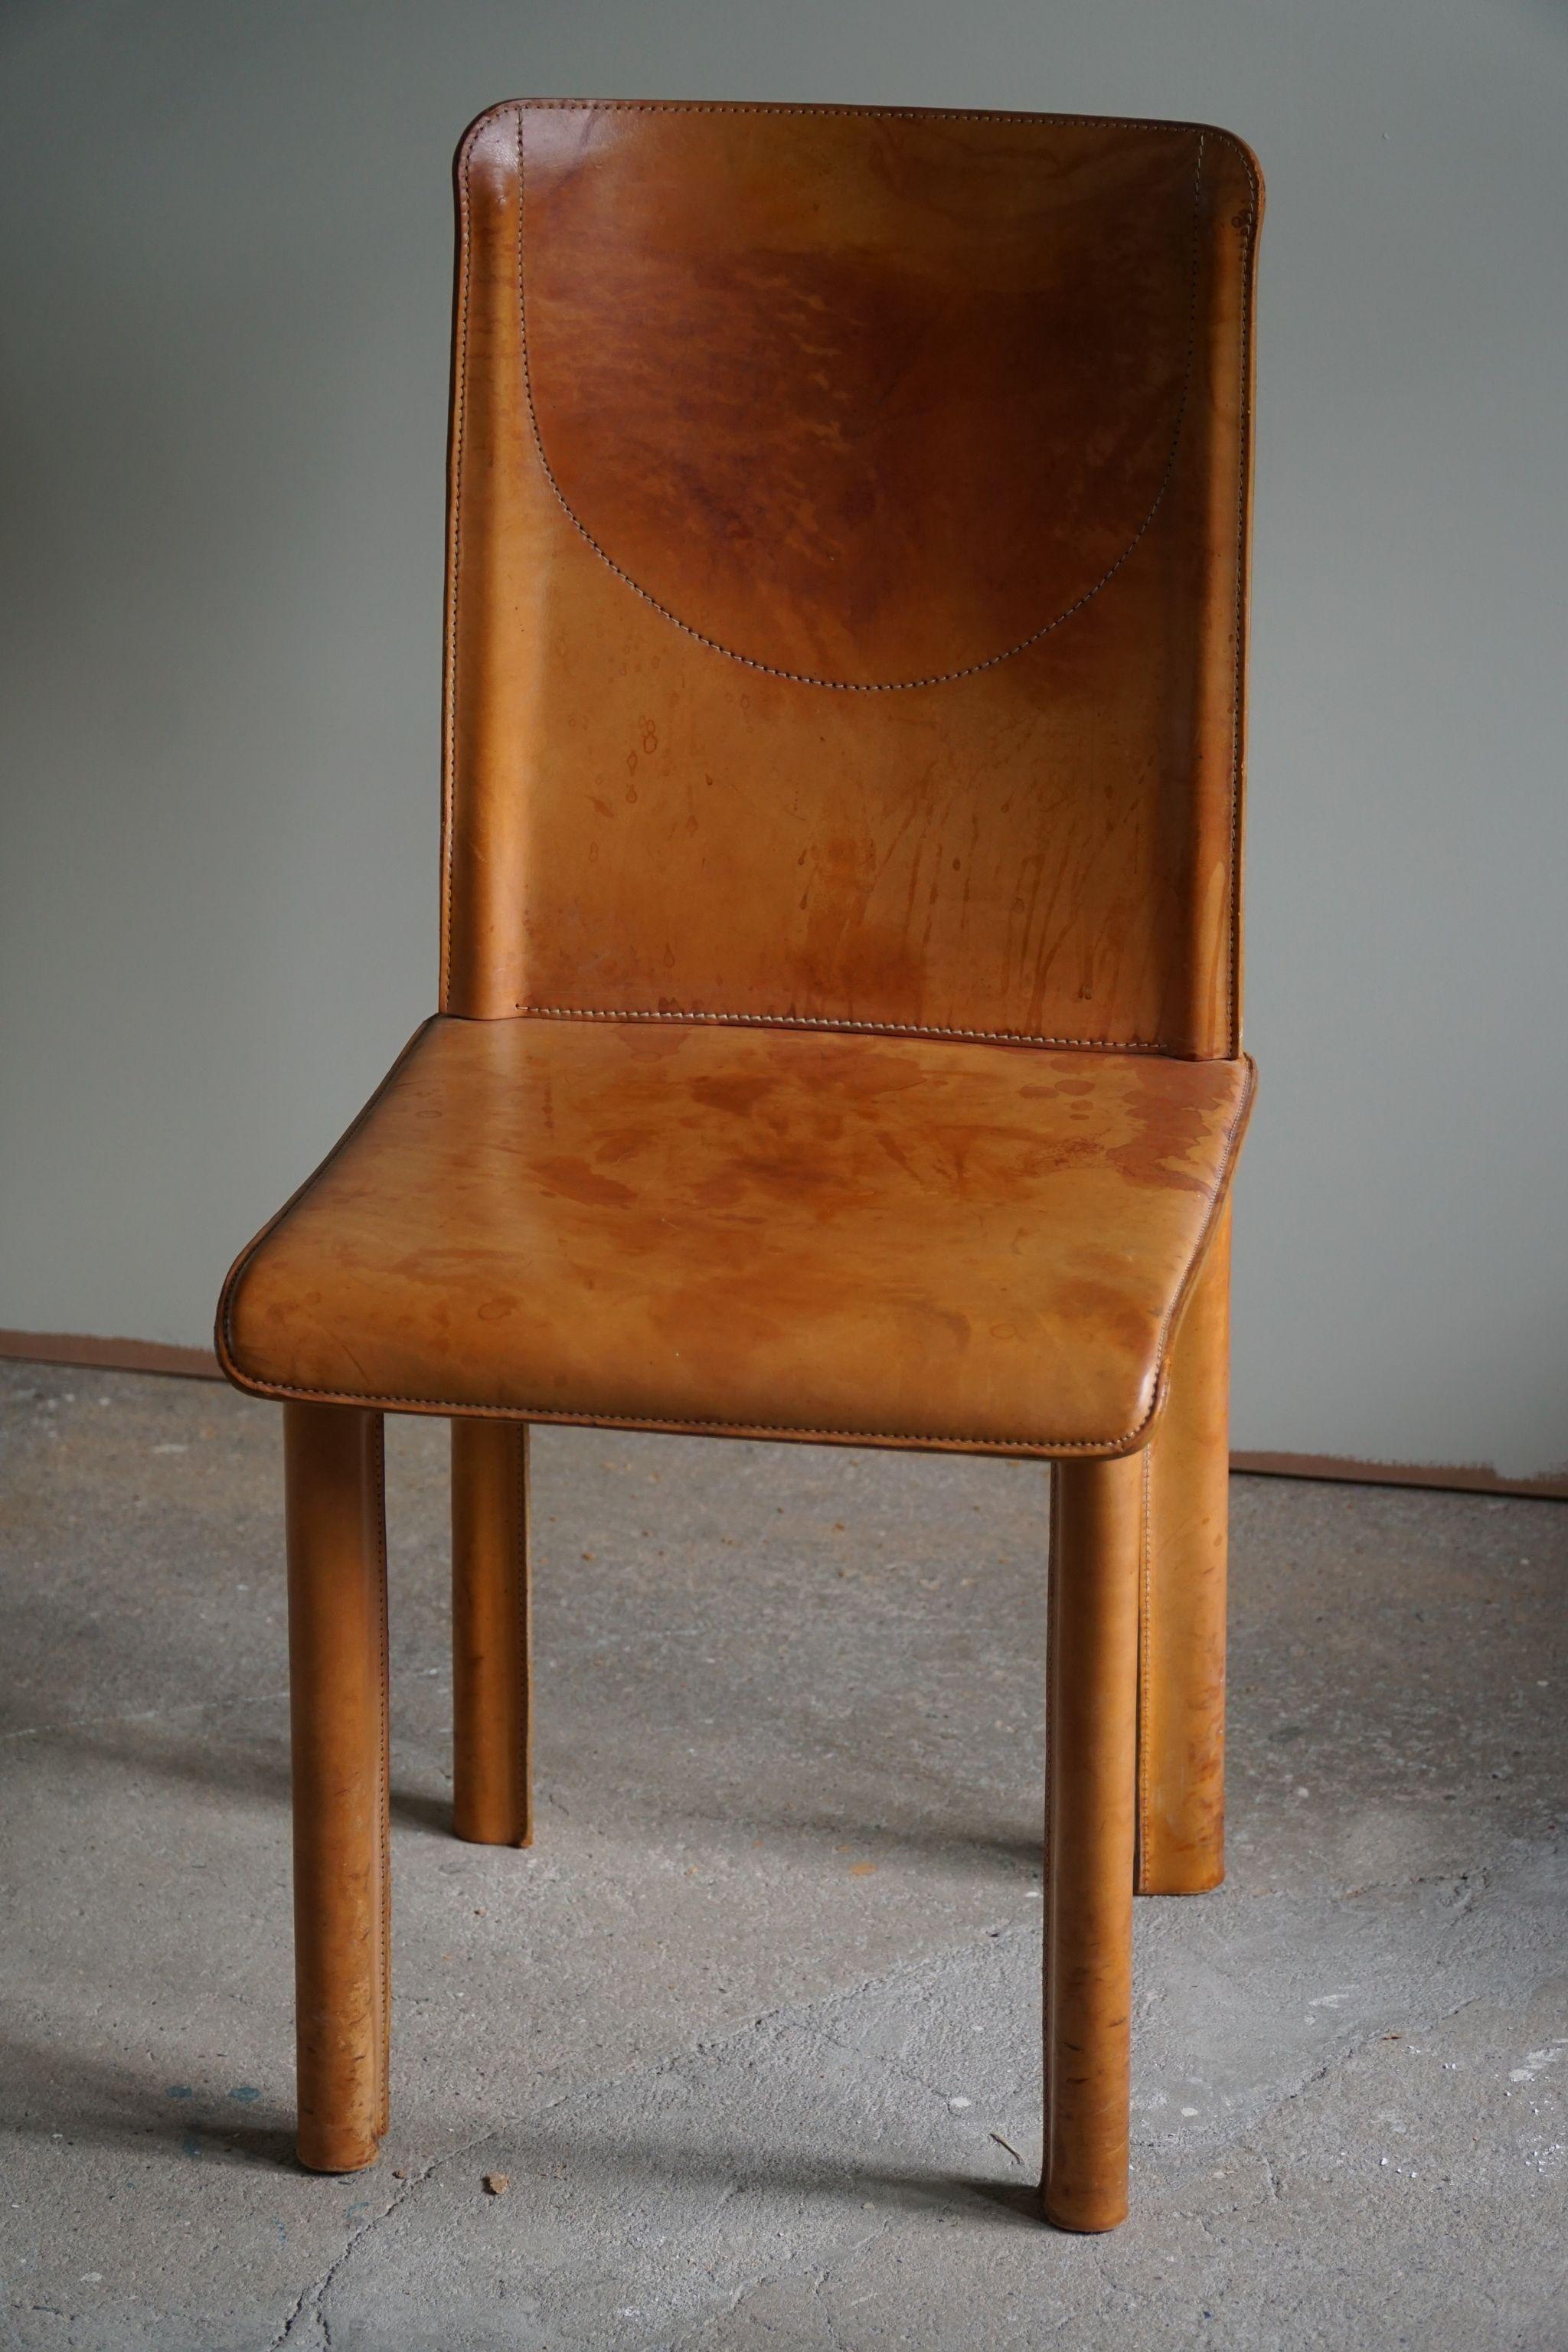 Italian Modern, Dining Chair in Patinated Cognac Leather, Mario Bellini, 1970s 1